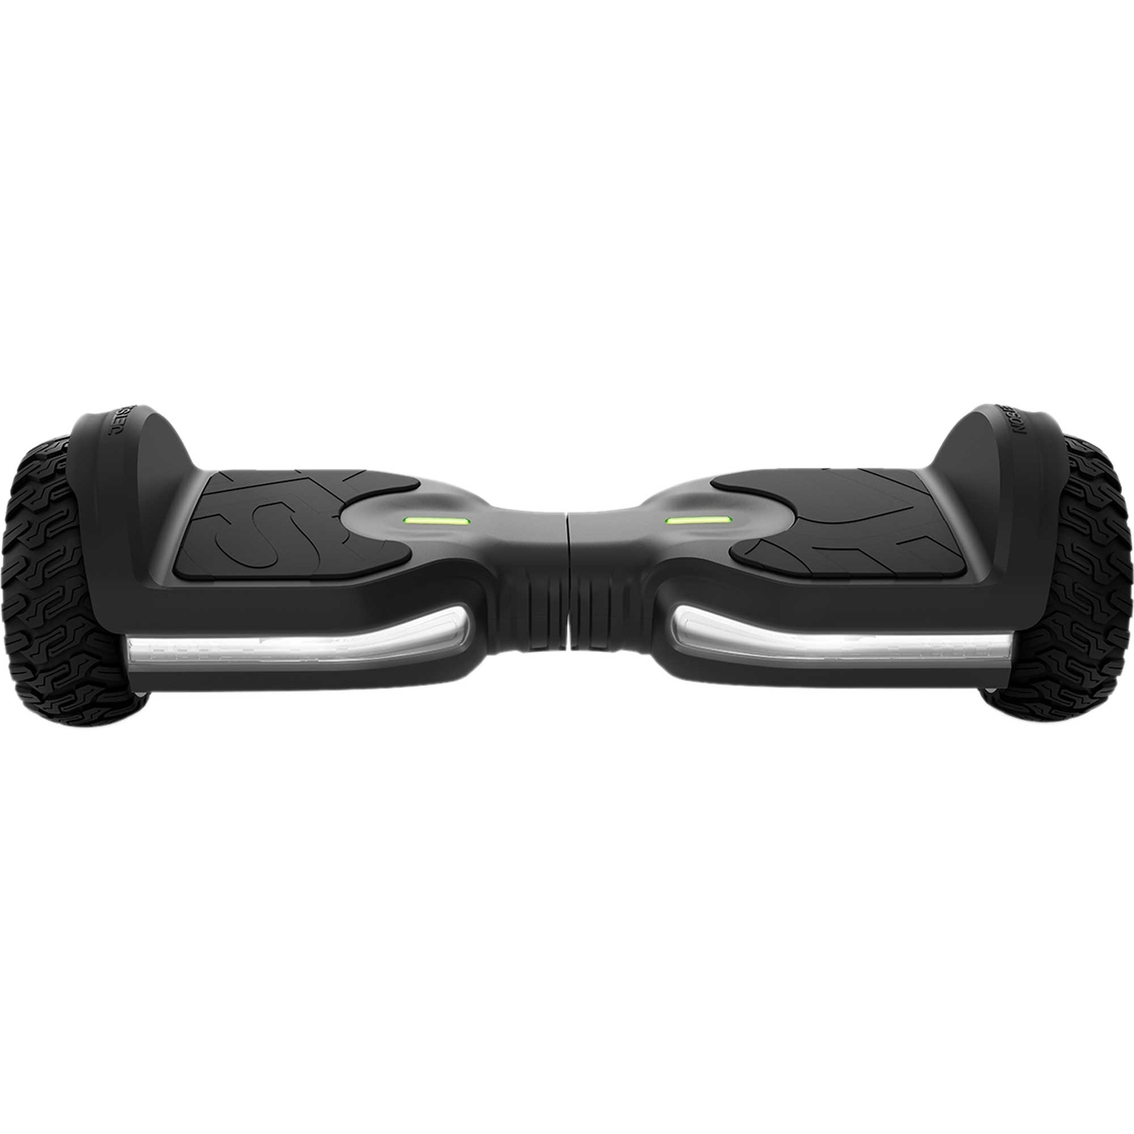 Jetson Flash Self Balancing Hoverboard with Built In Bluetooth Speaker - Image 2 of 10